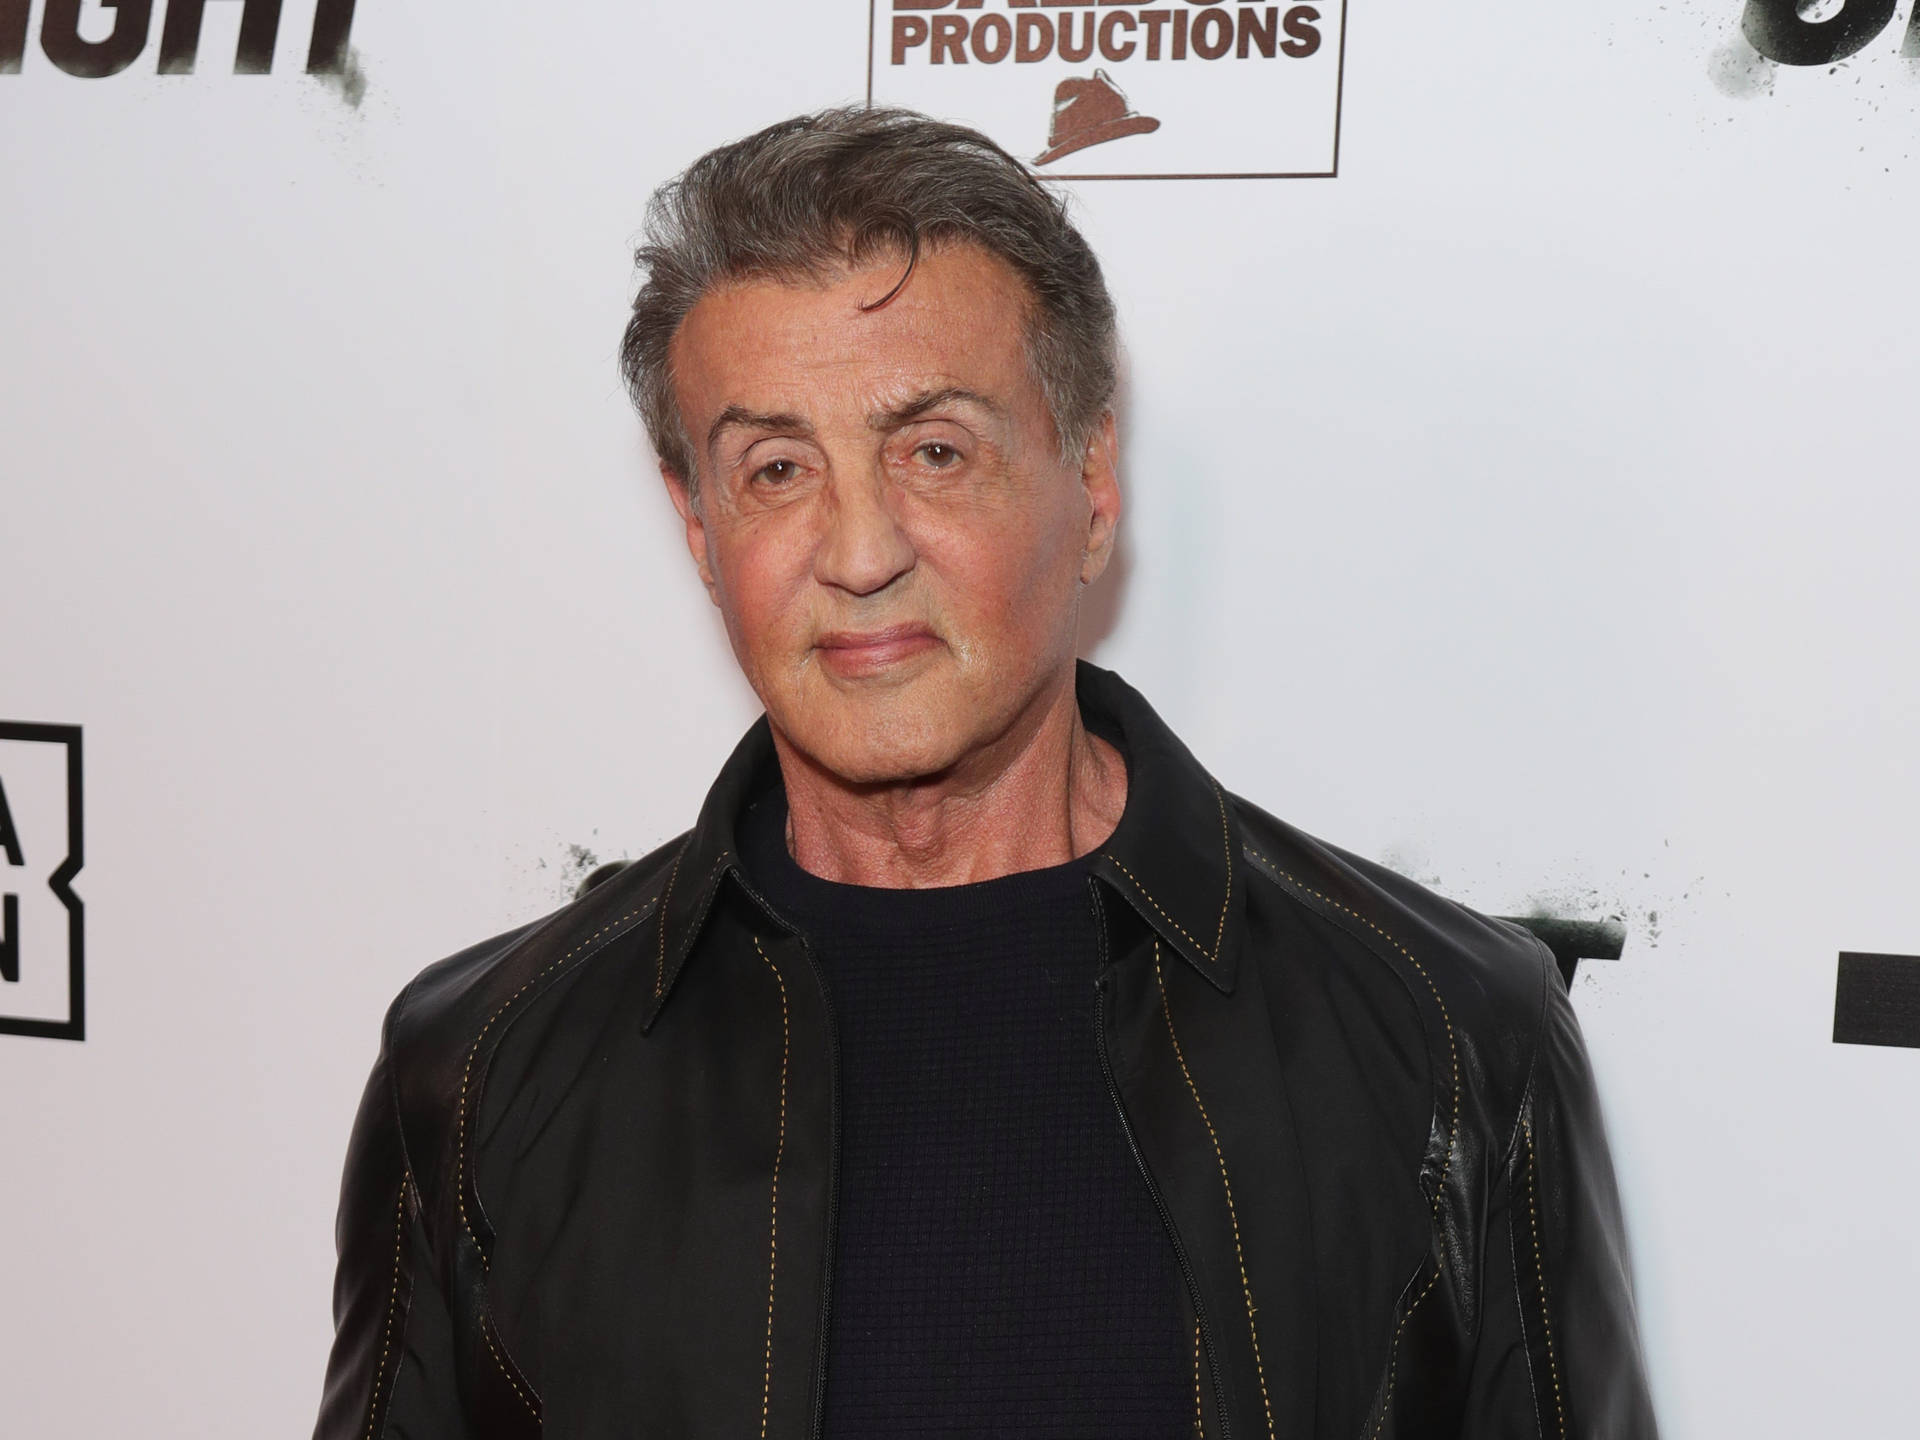 Sylvester Stallone Against White Wall Background